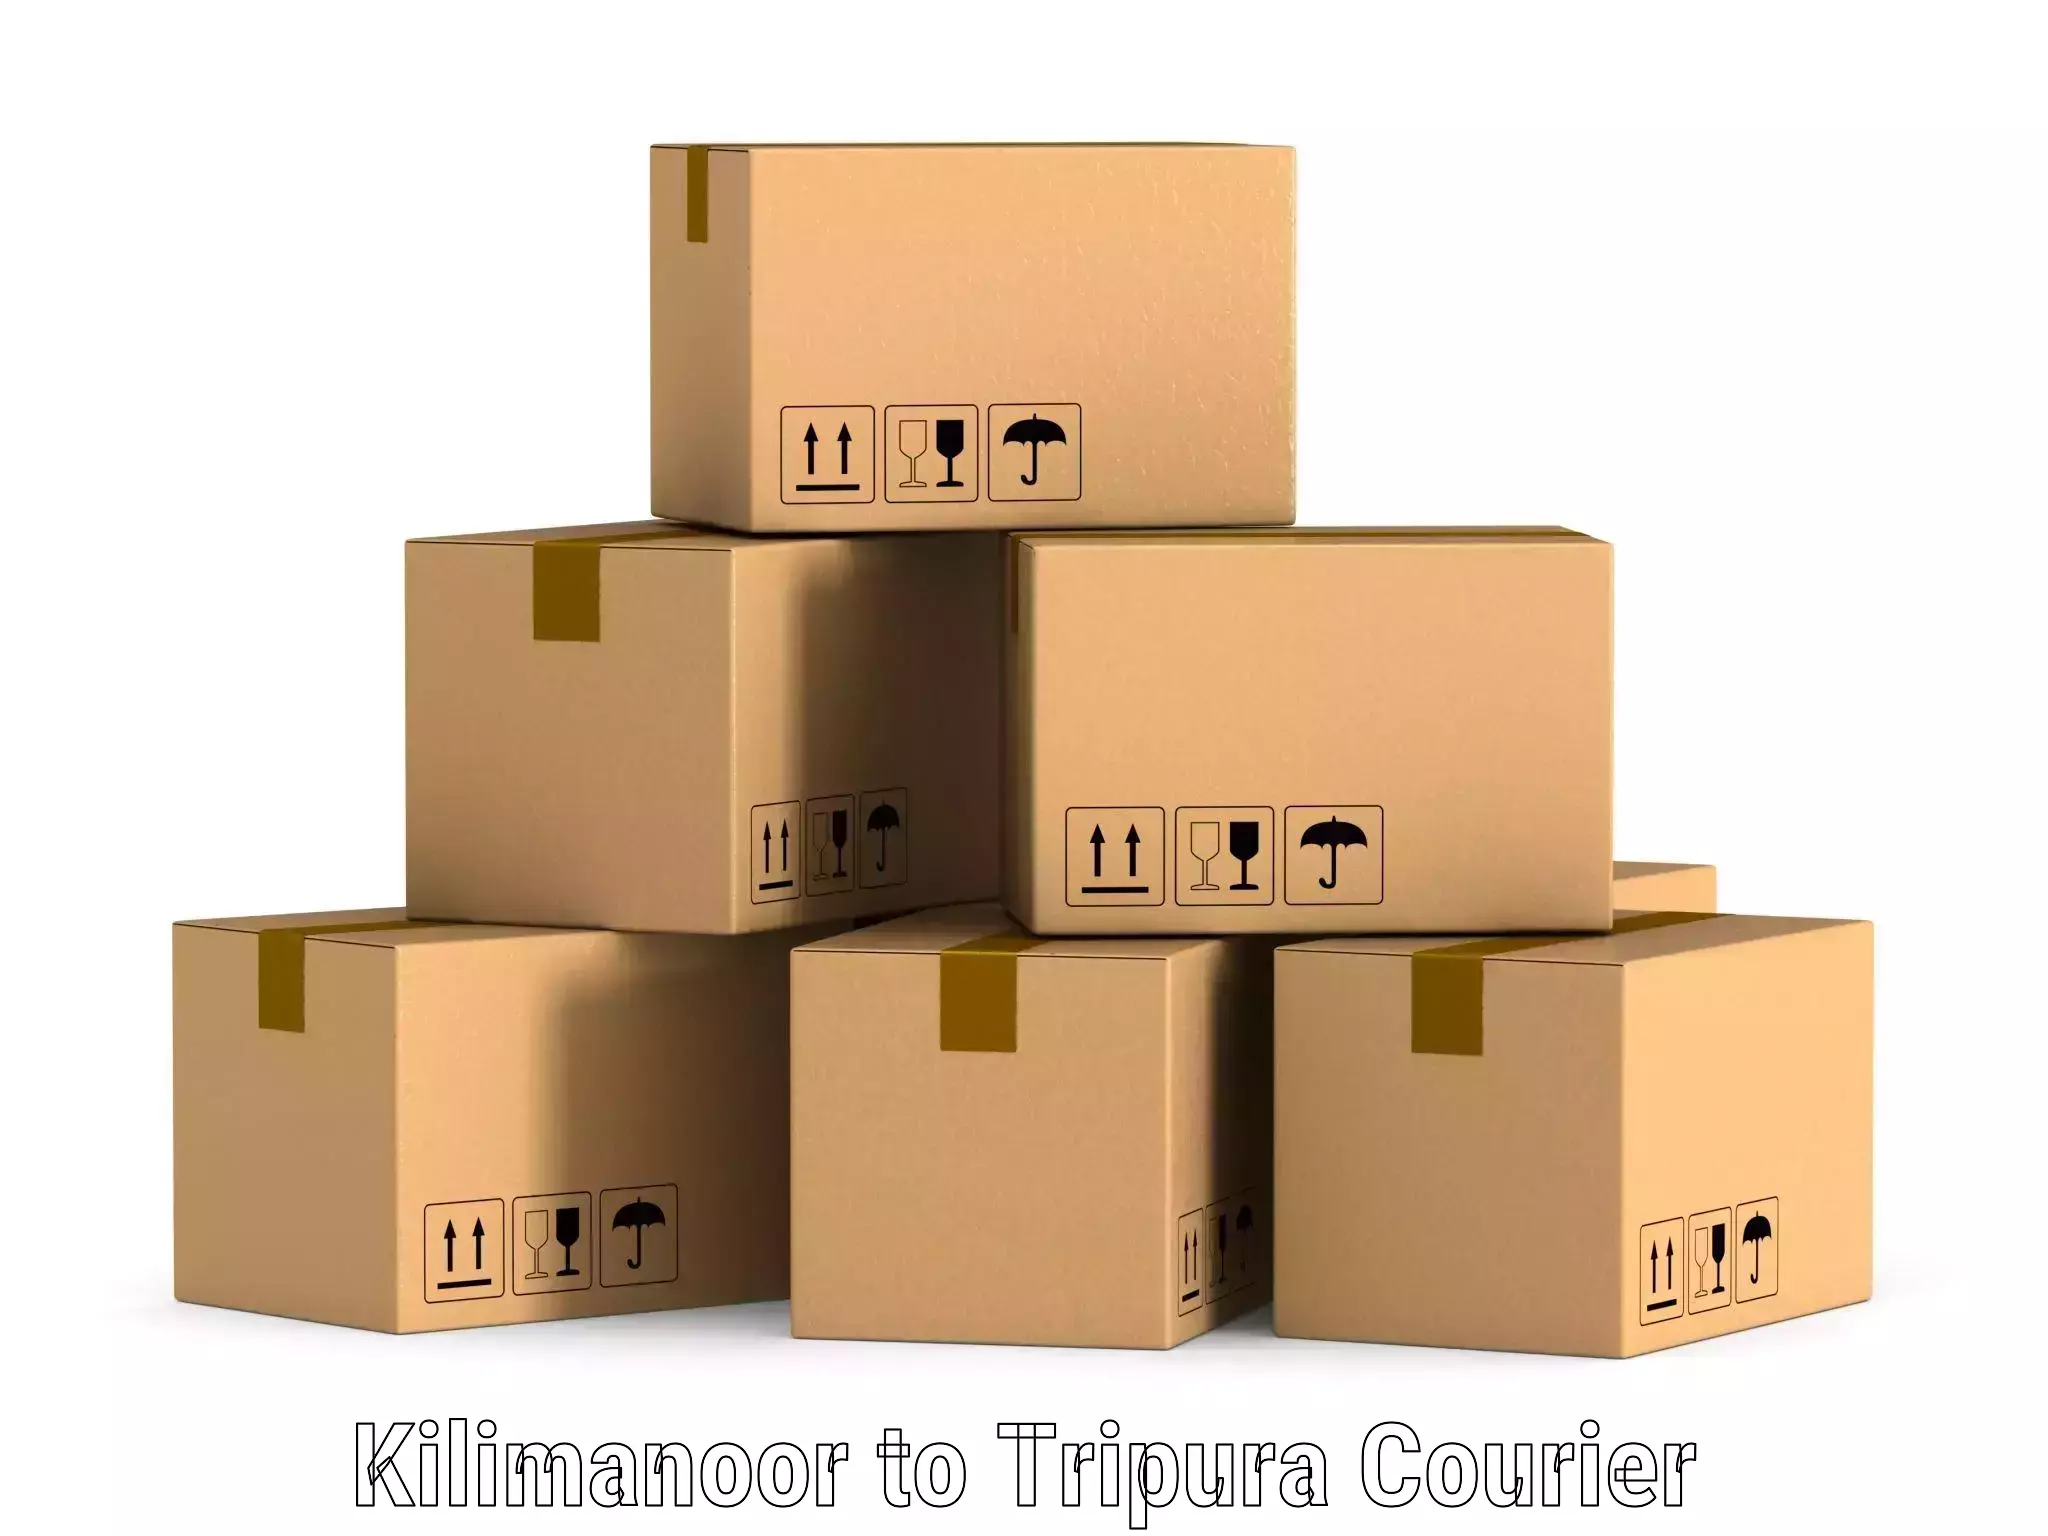 Global shipping solutions Kilimanoor to Tripura